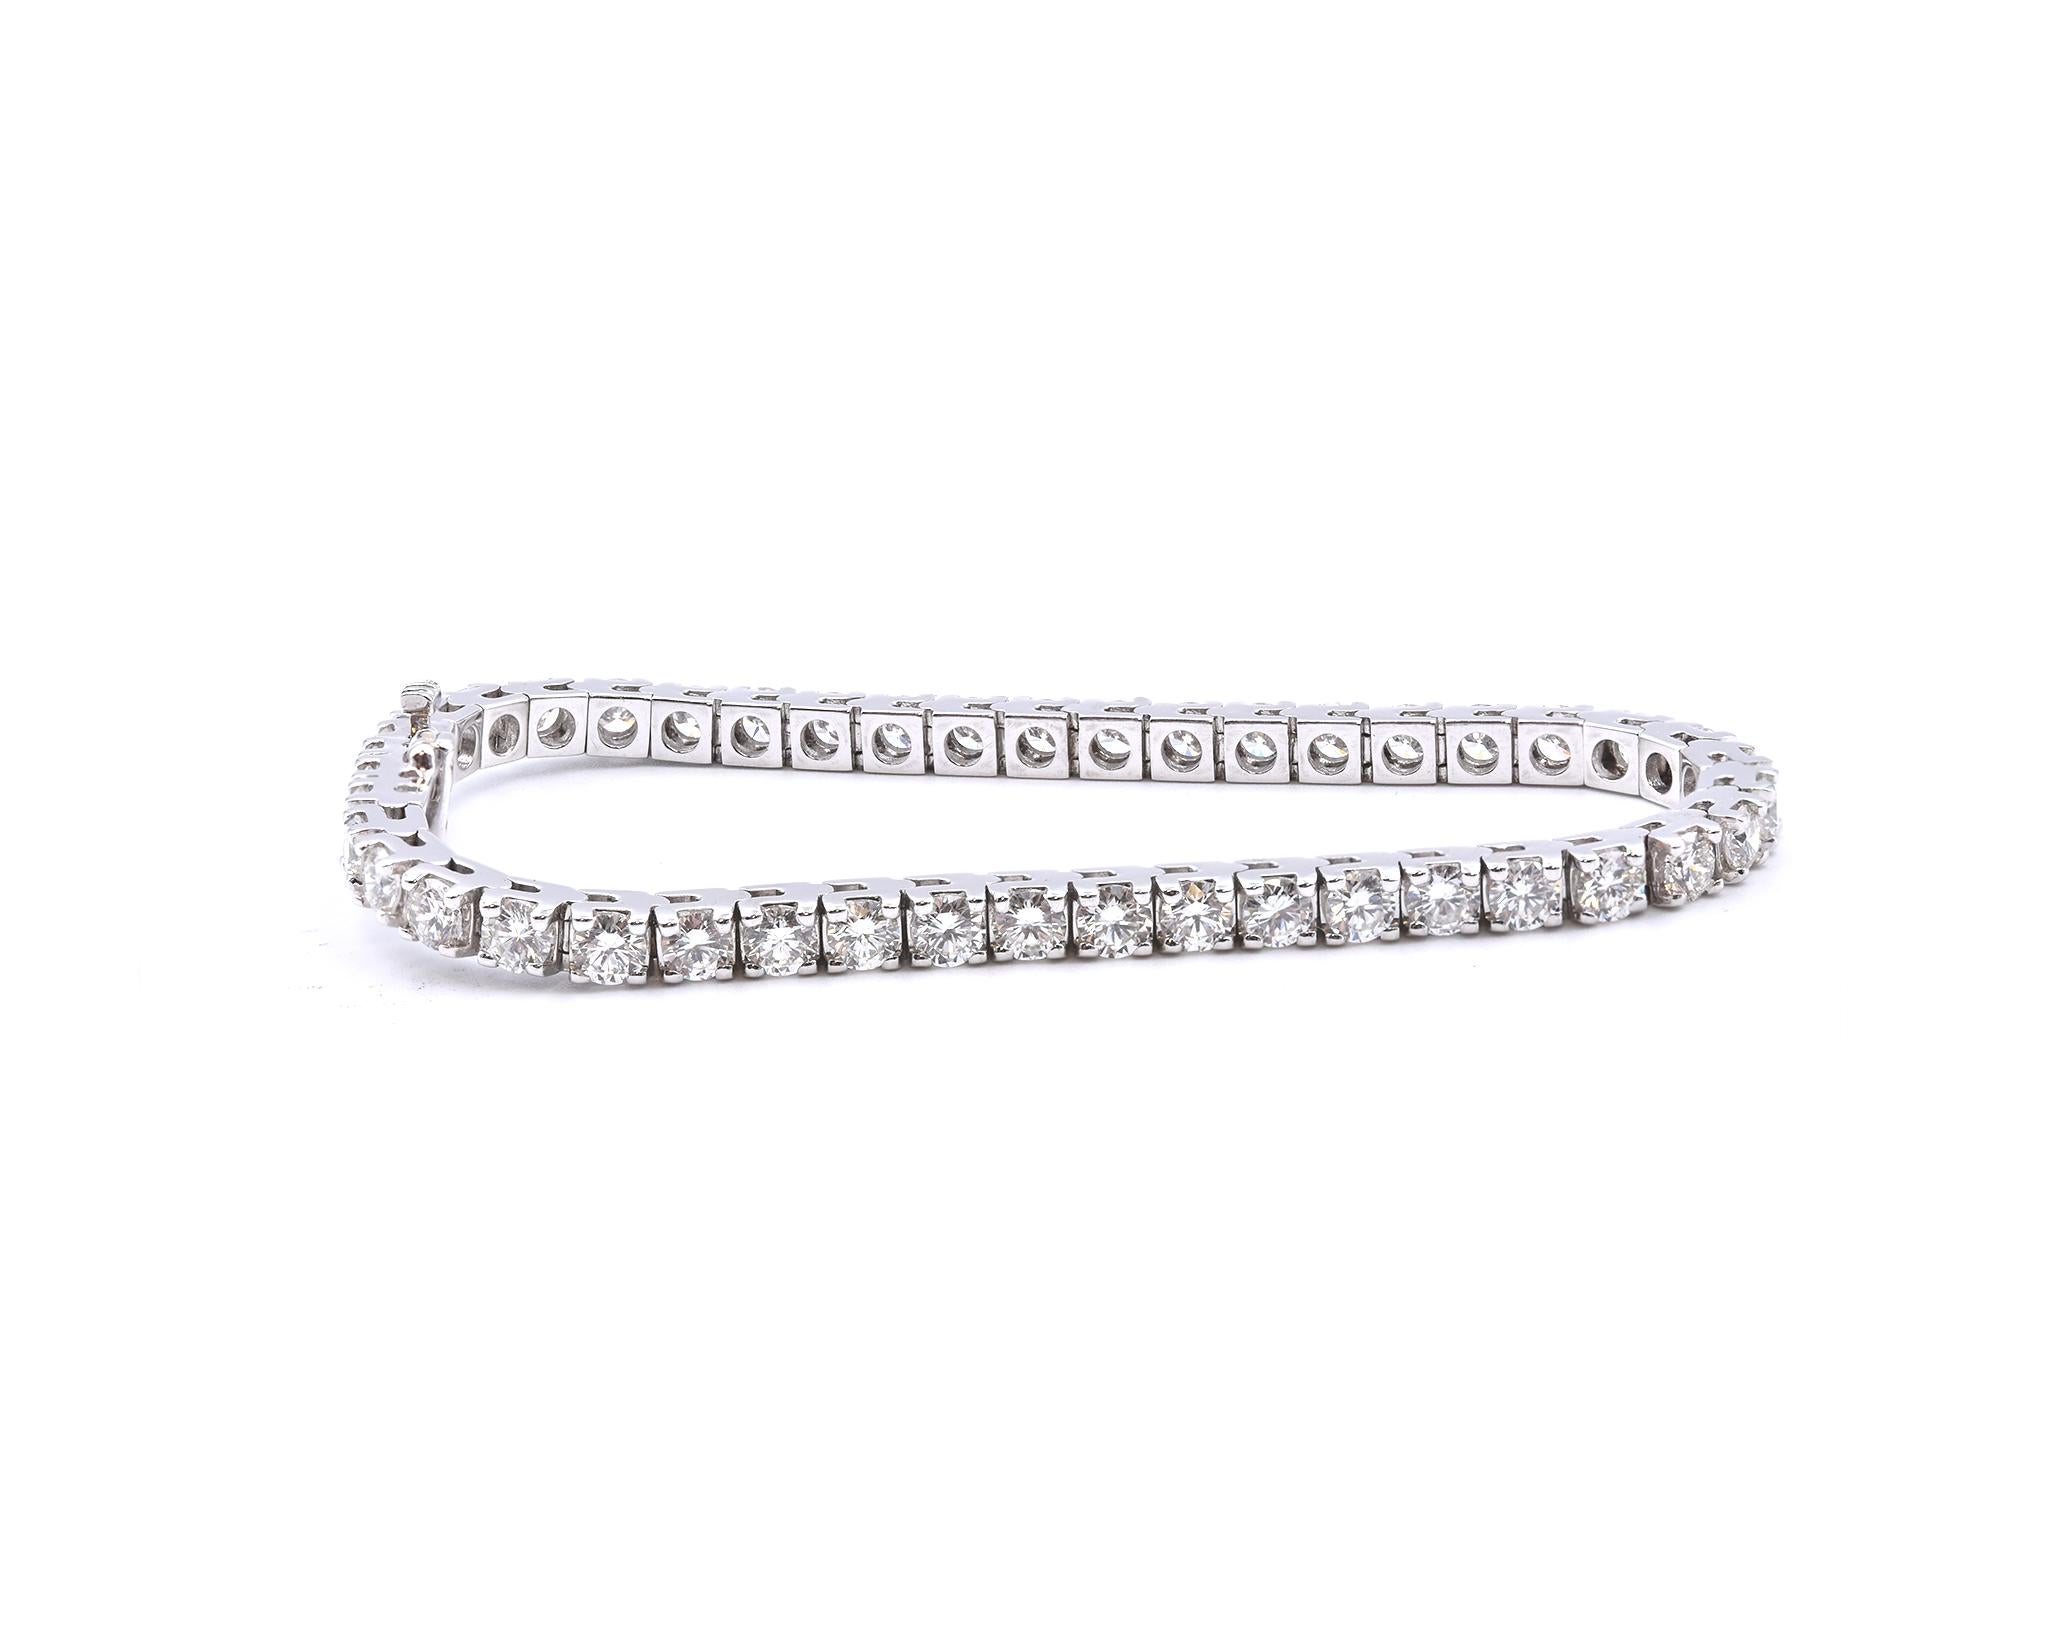 Material: 18K white gold 
Diamonds: 44 round brilliant cut = 7.50cttw
Color: G
Clarity: VS2
Dimensions: bracelet will fit up to a 7-inch wrist
Weight: 19.65 grams
